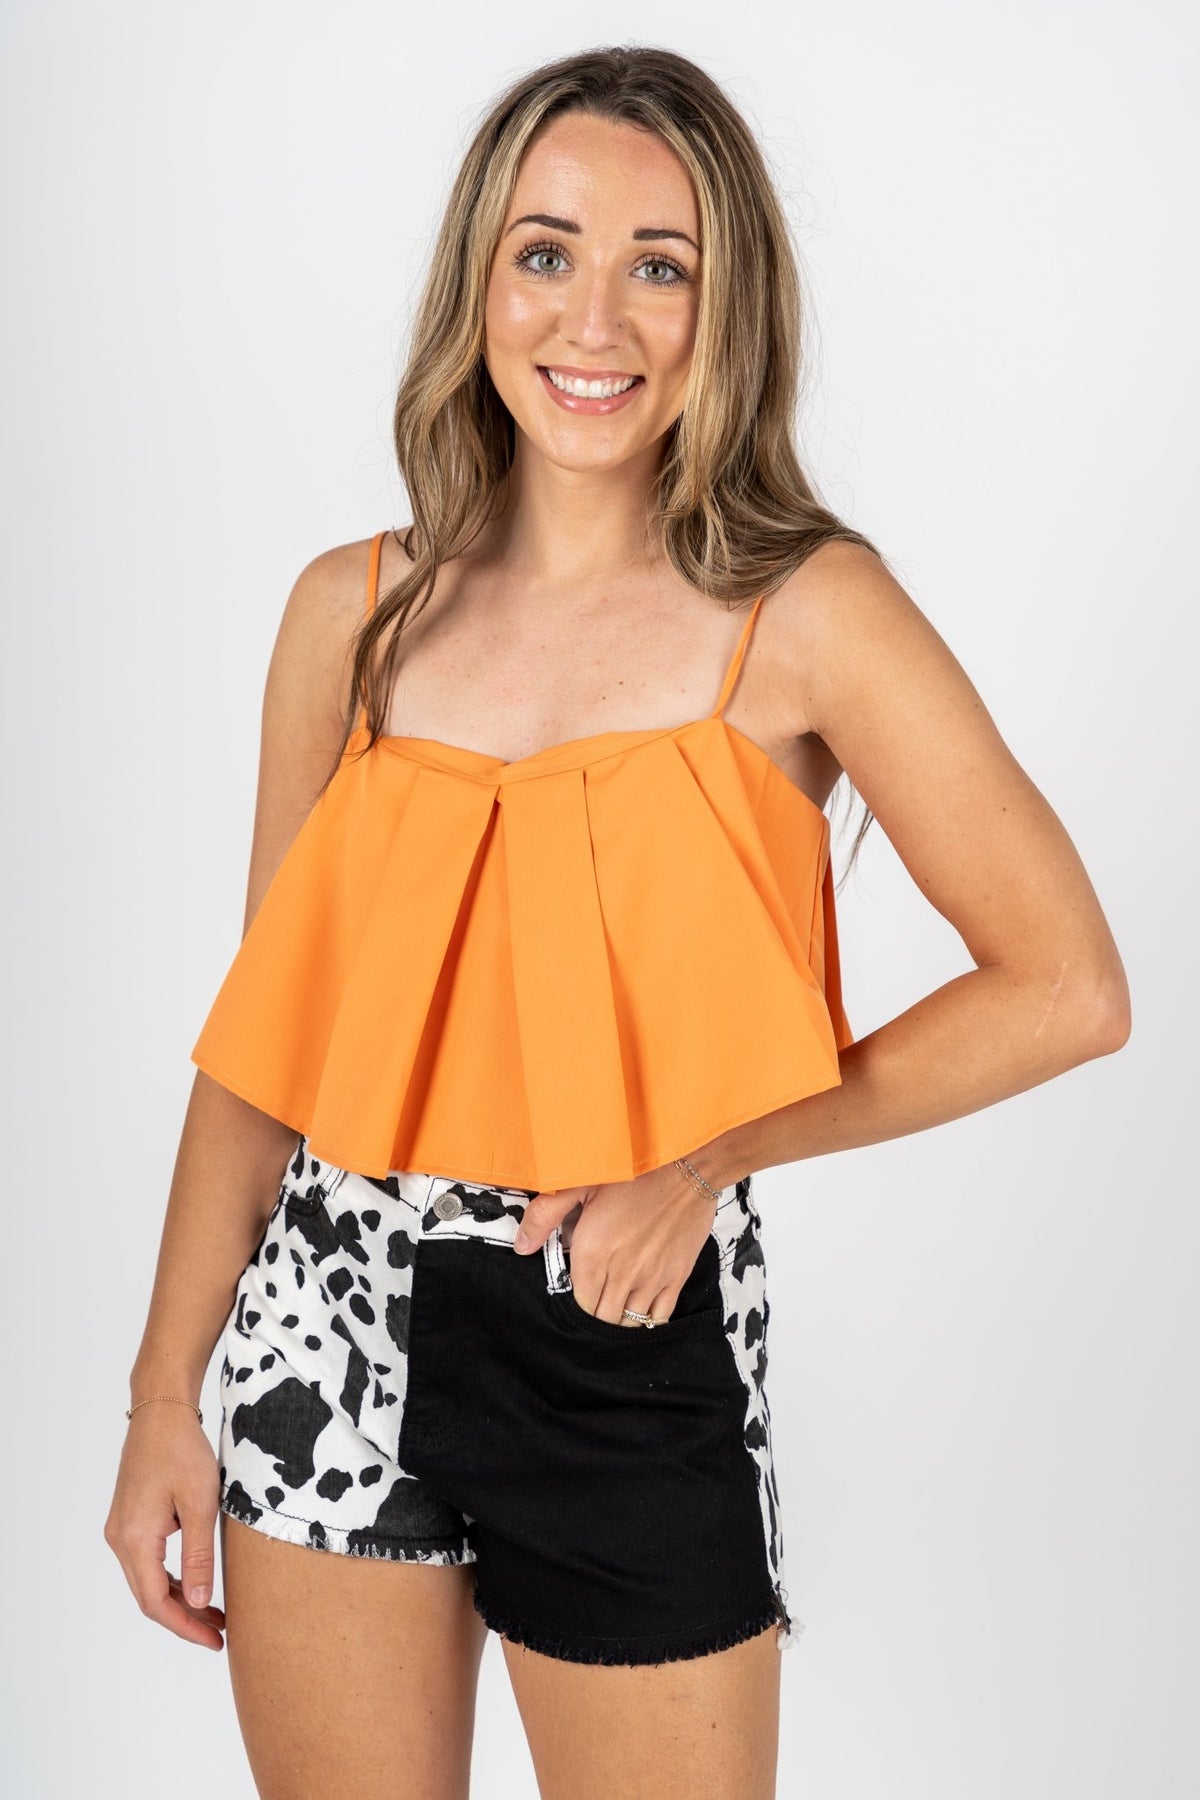 Pleated crop tank top orange - Cute tank top - Trendy Tank Tops at Lush Fashion Lounge Boutique in Oklahoma City